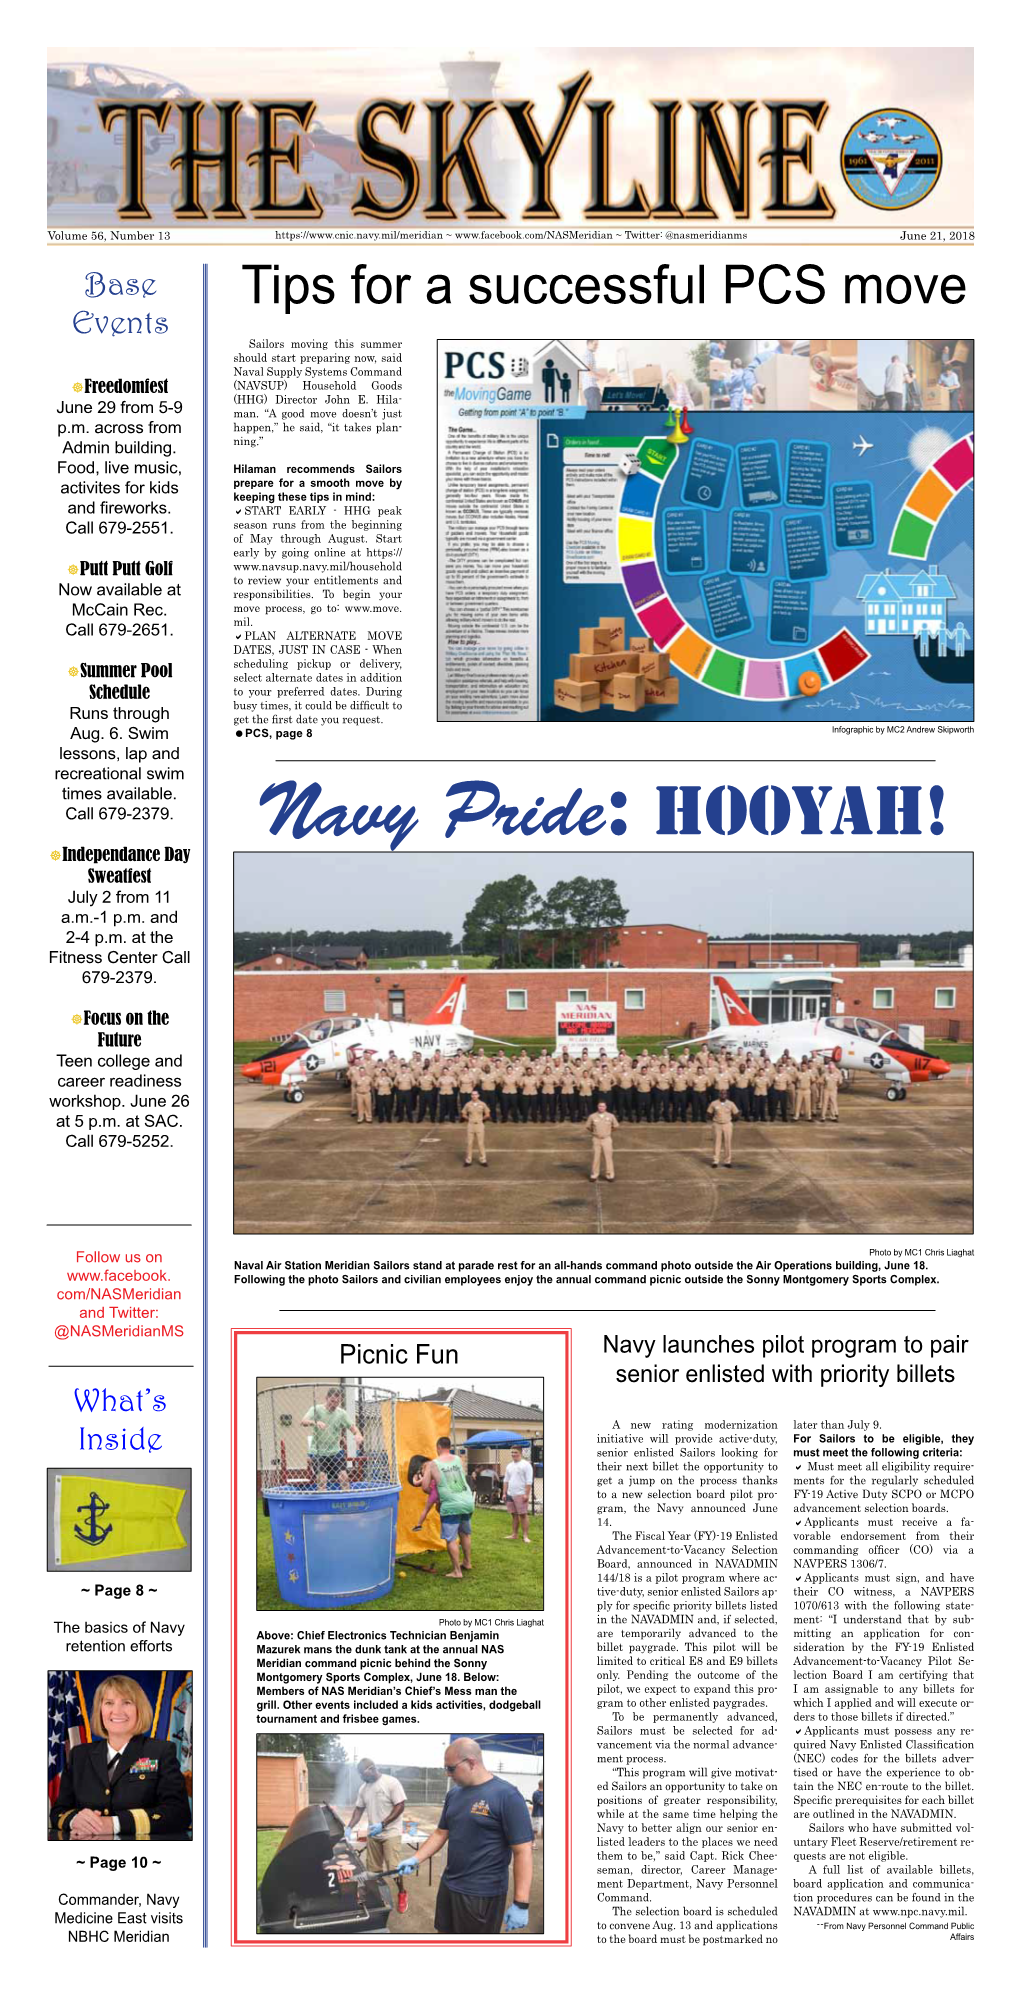 Navy Pride: Hooyah! ]Independance Day Sweatfest July 2 from 11 A.M.-1 P.M